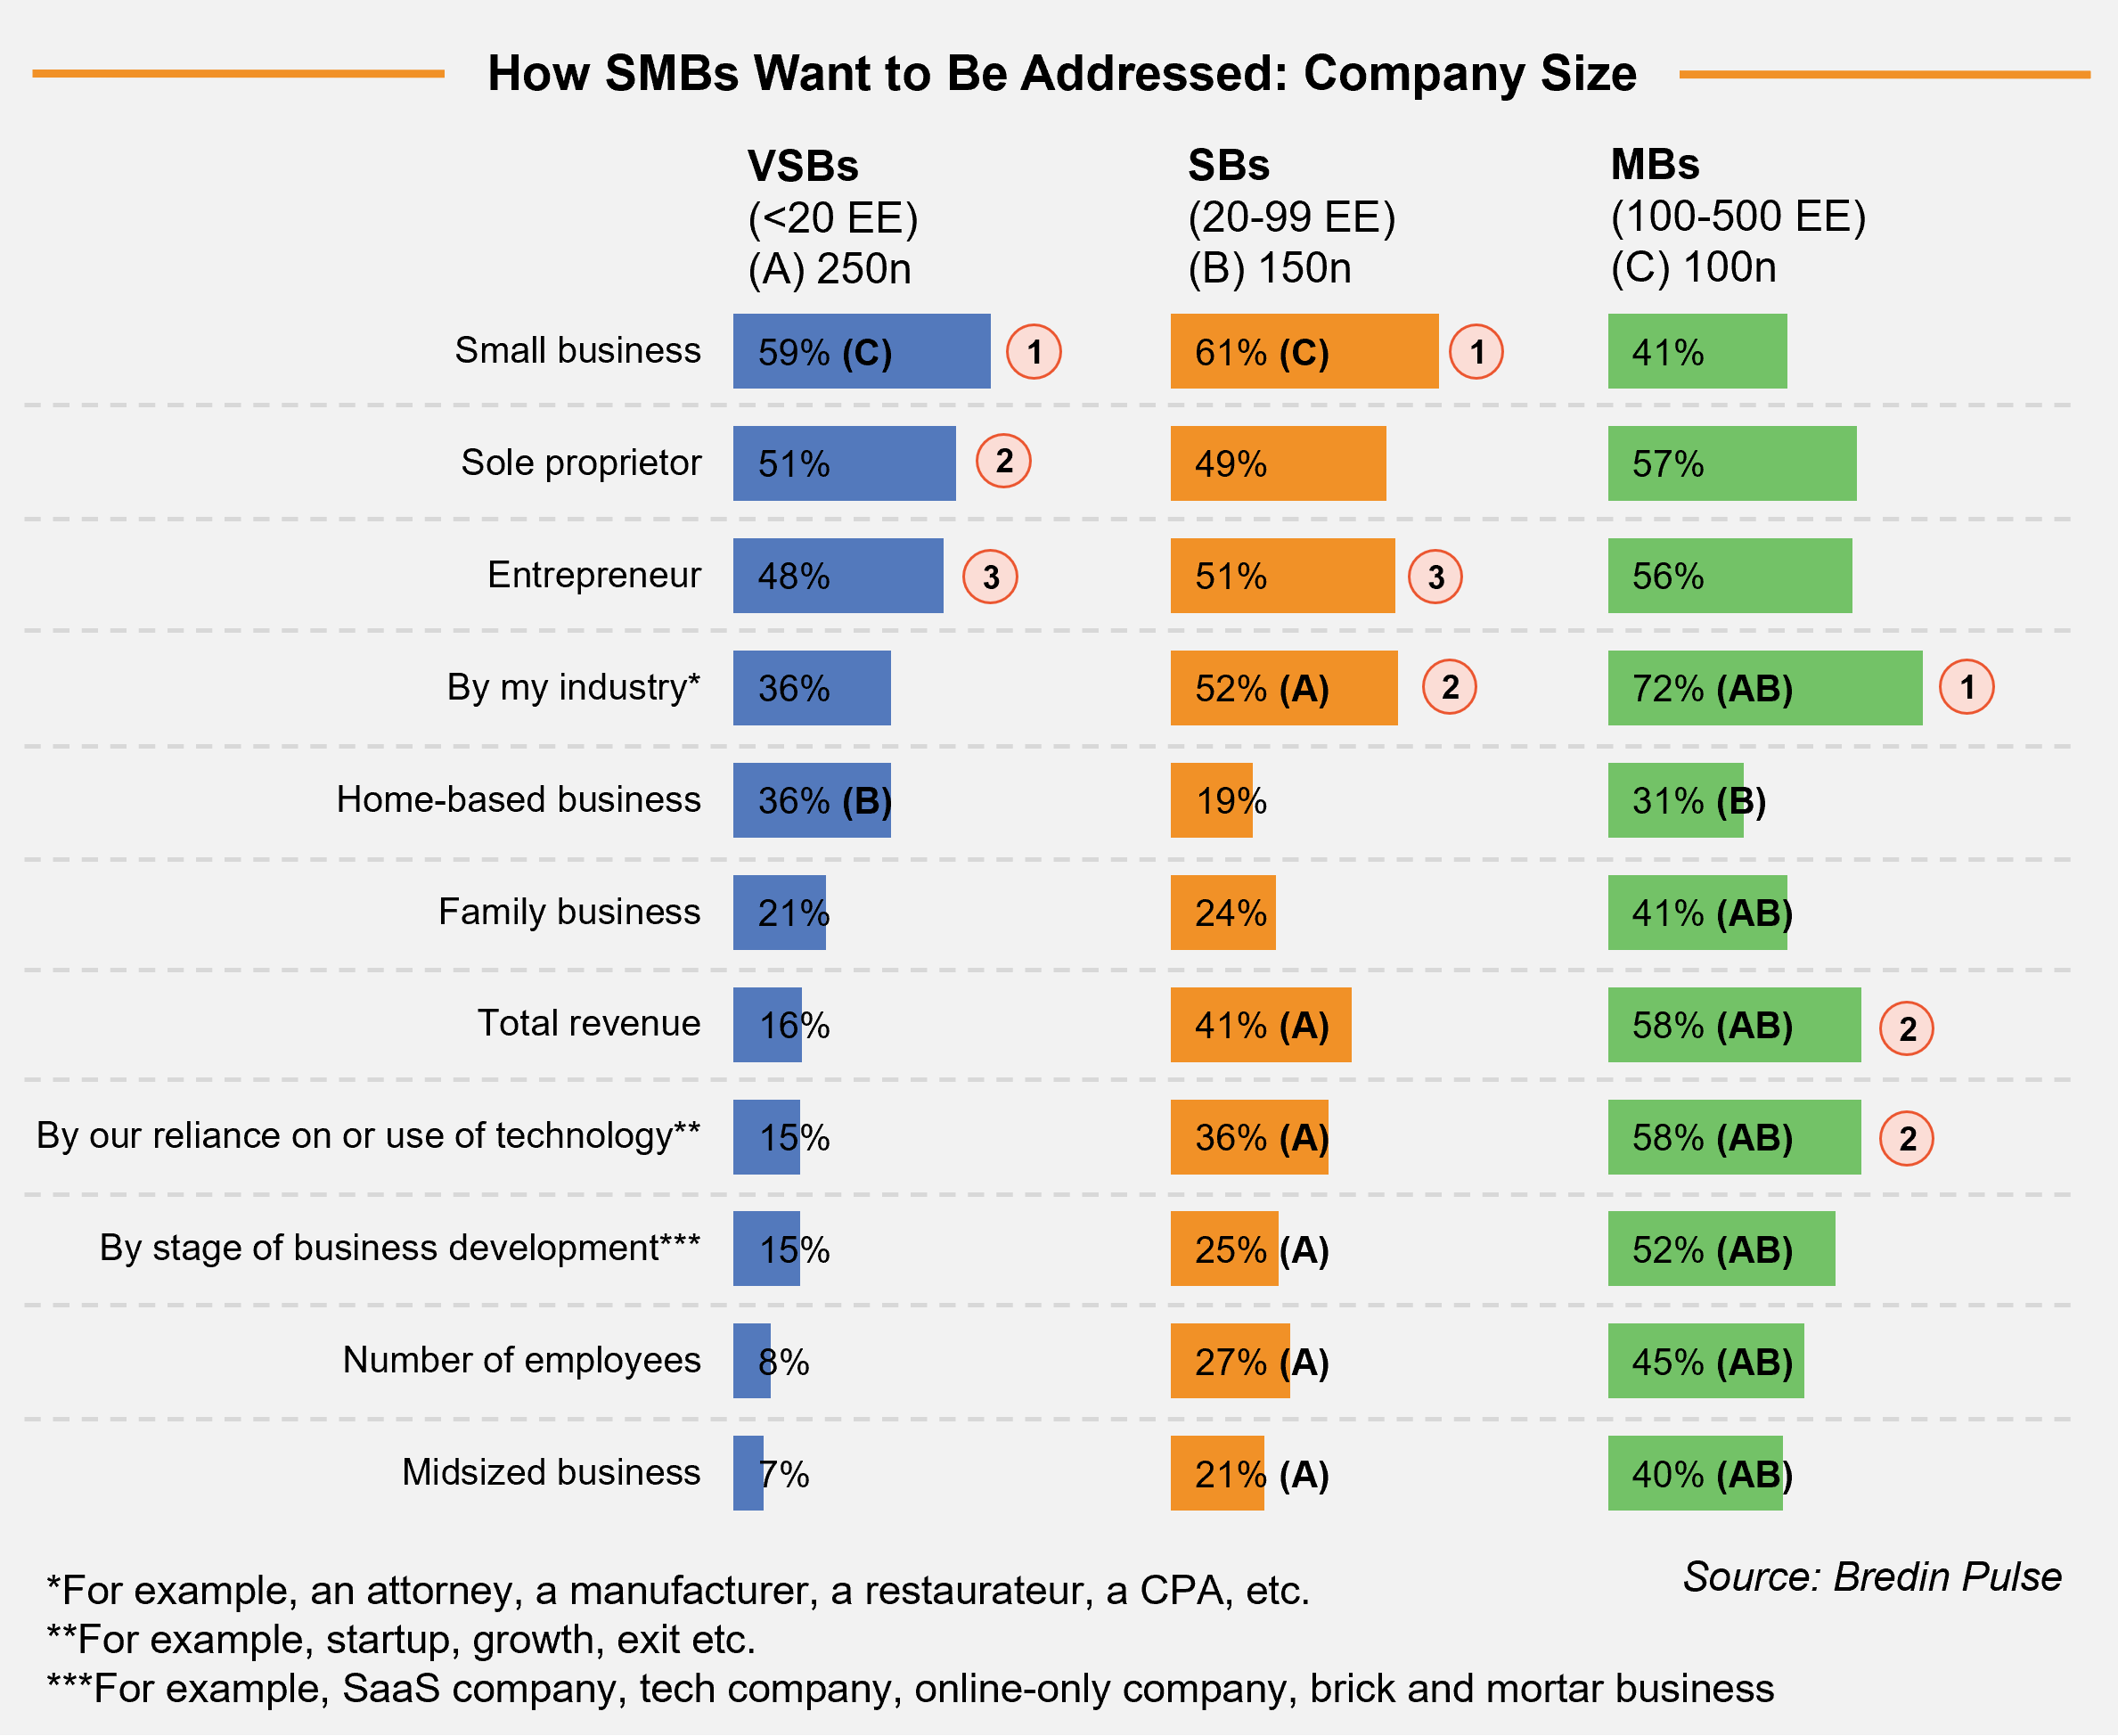 How SMBs Want to Be Addressed - Company Size